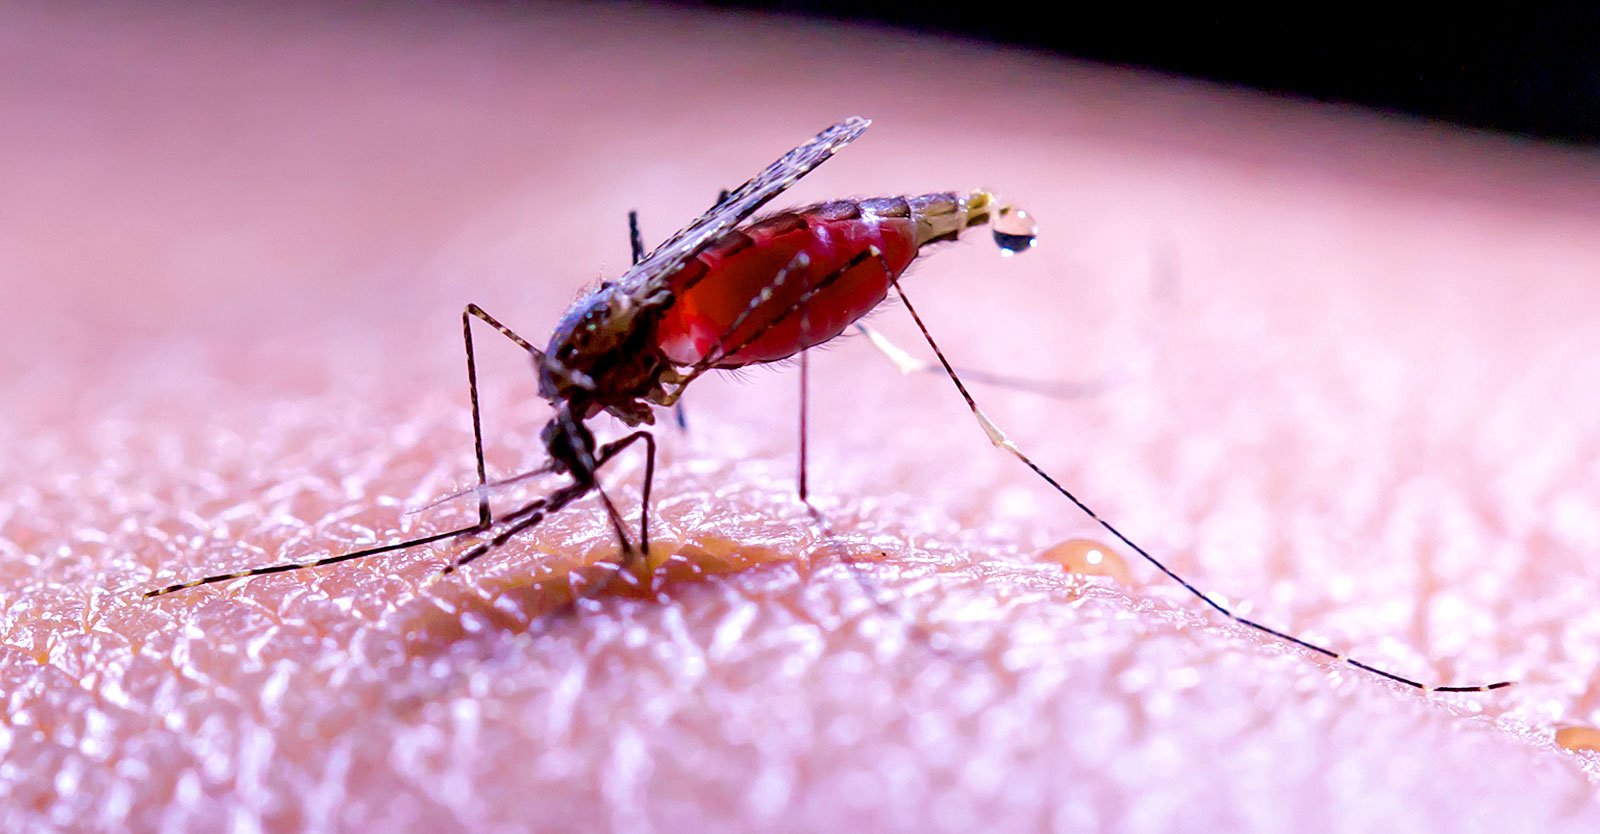 Researchers Use GMO Mosquitoes to Vaccinate Humans in NIH-Funded Malaria Study • Children's Health Defense